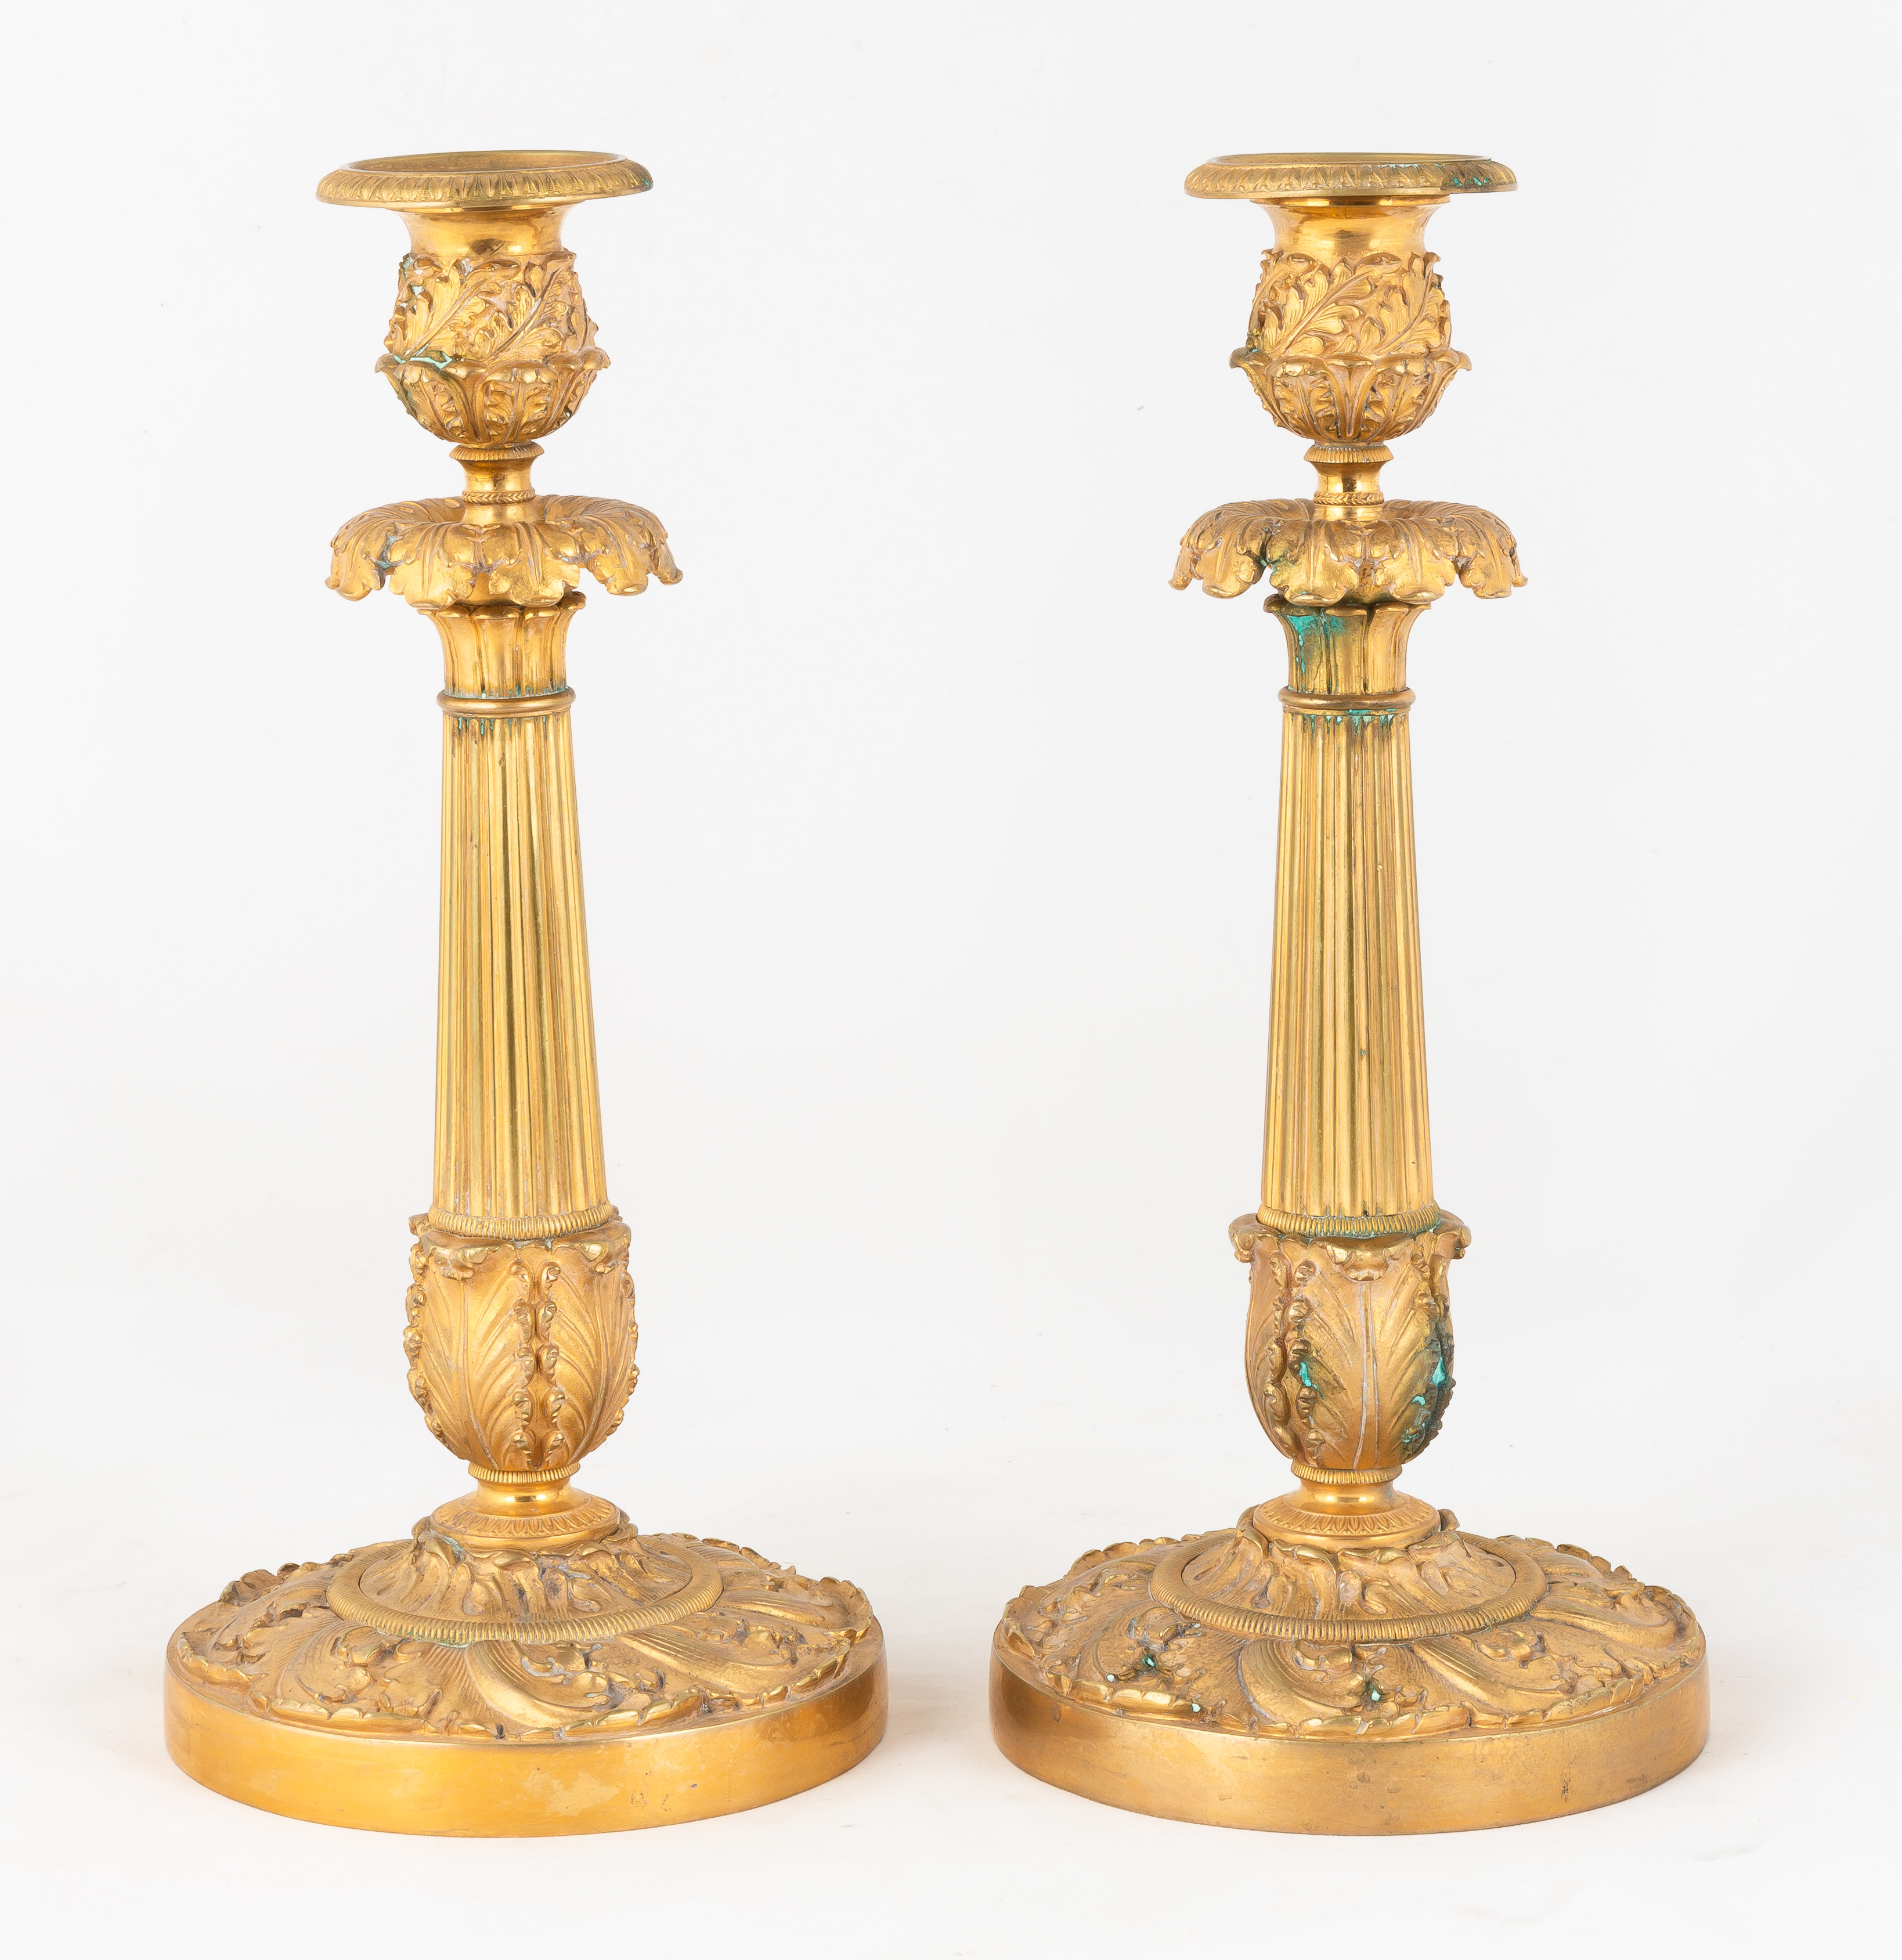 PAIR OF FRENCH ORMULU BRONZE CANDLESTICKS